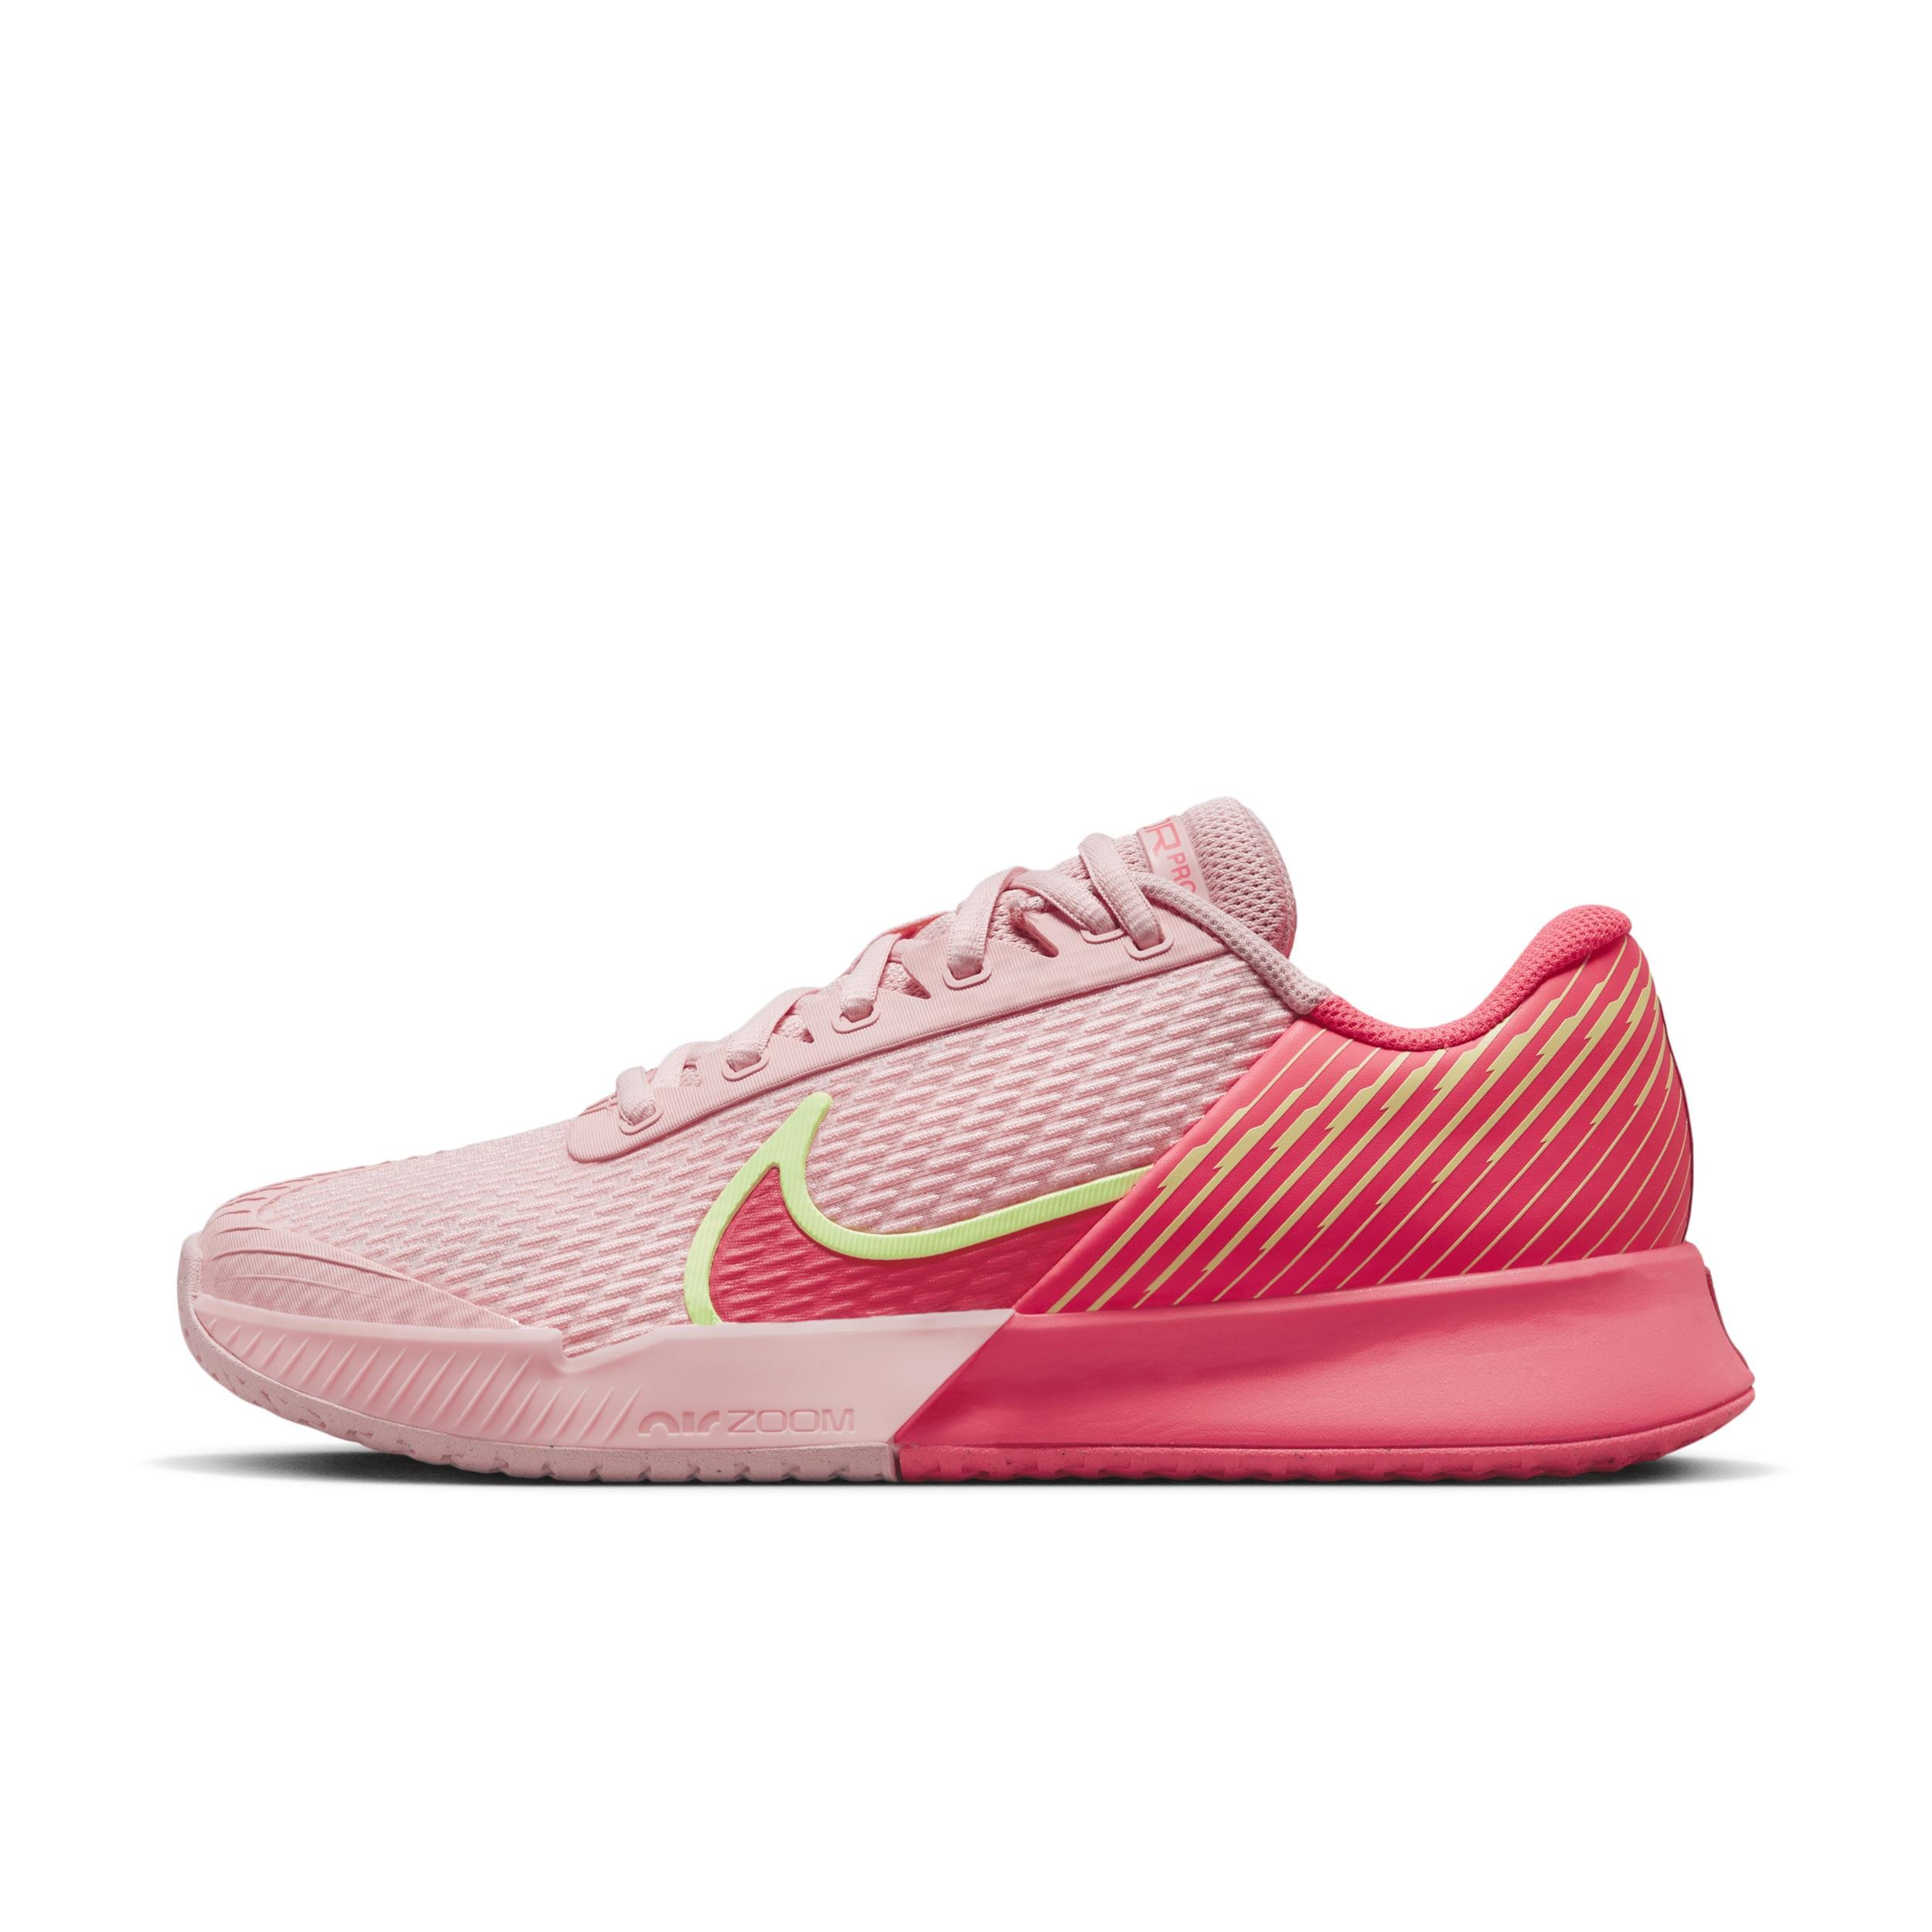 Nike Court Air Zoom Vapor Pro 2 Hard Court Tennis Shoes in Pink | Lyst